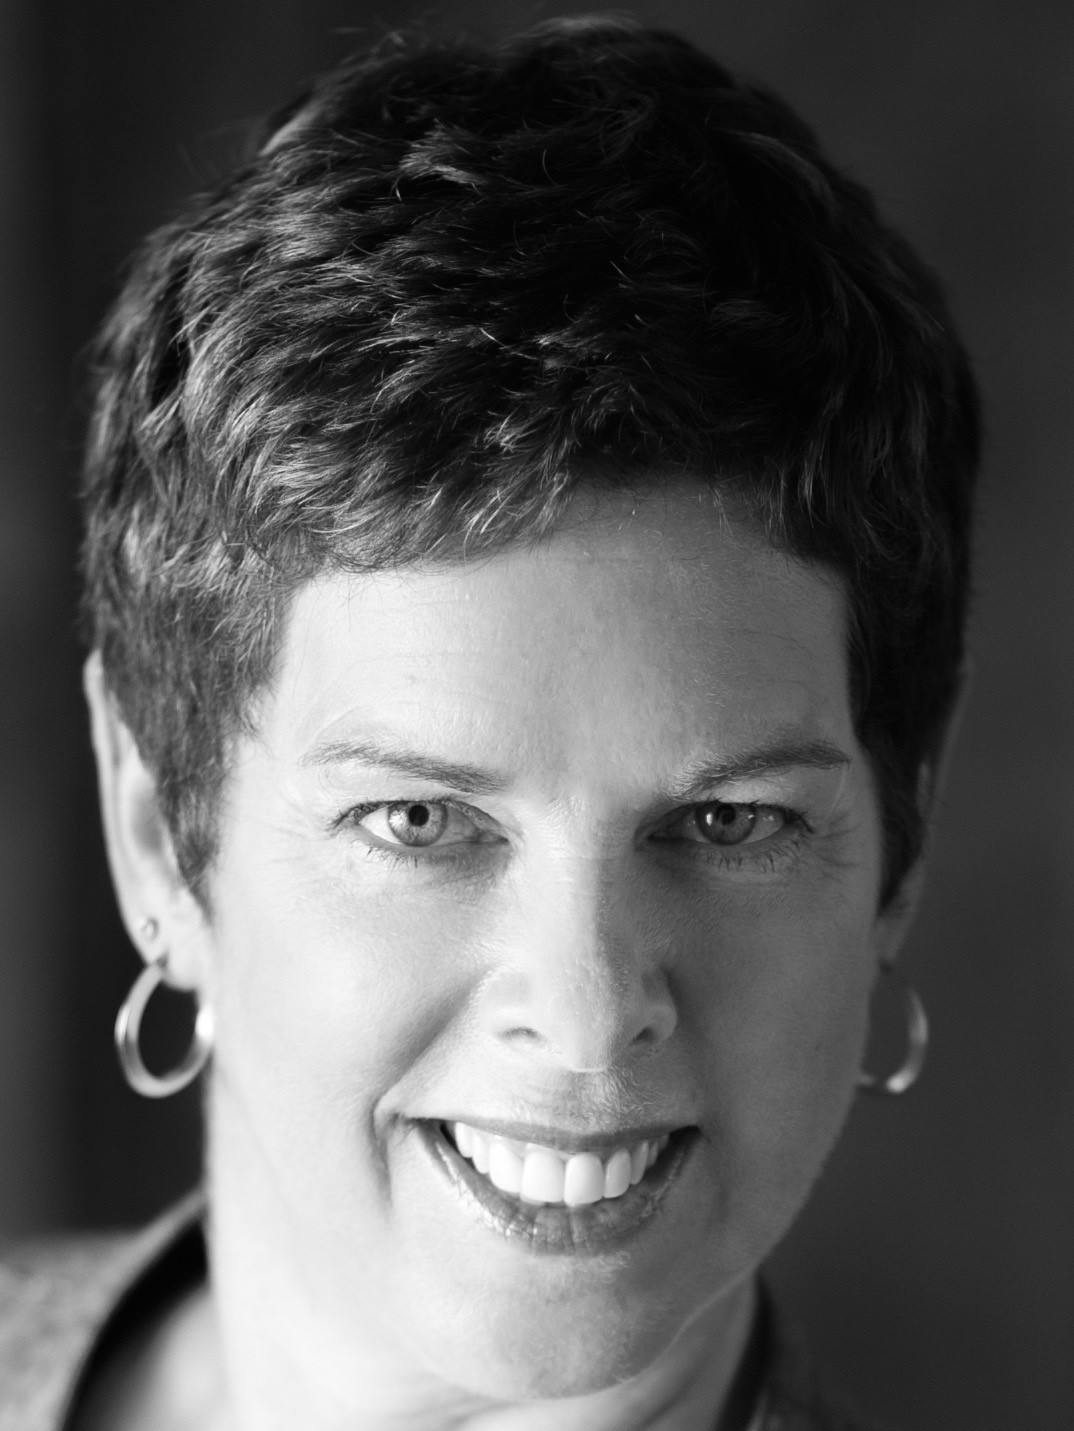 A black and white photo of a woman with short hair, wearing hoop earrings.